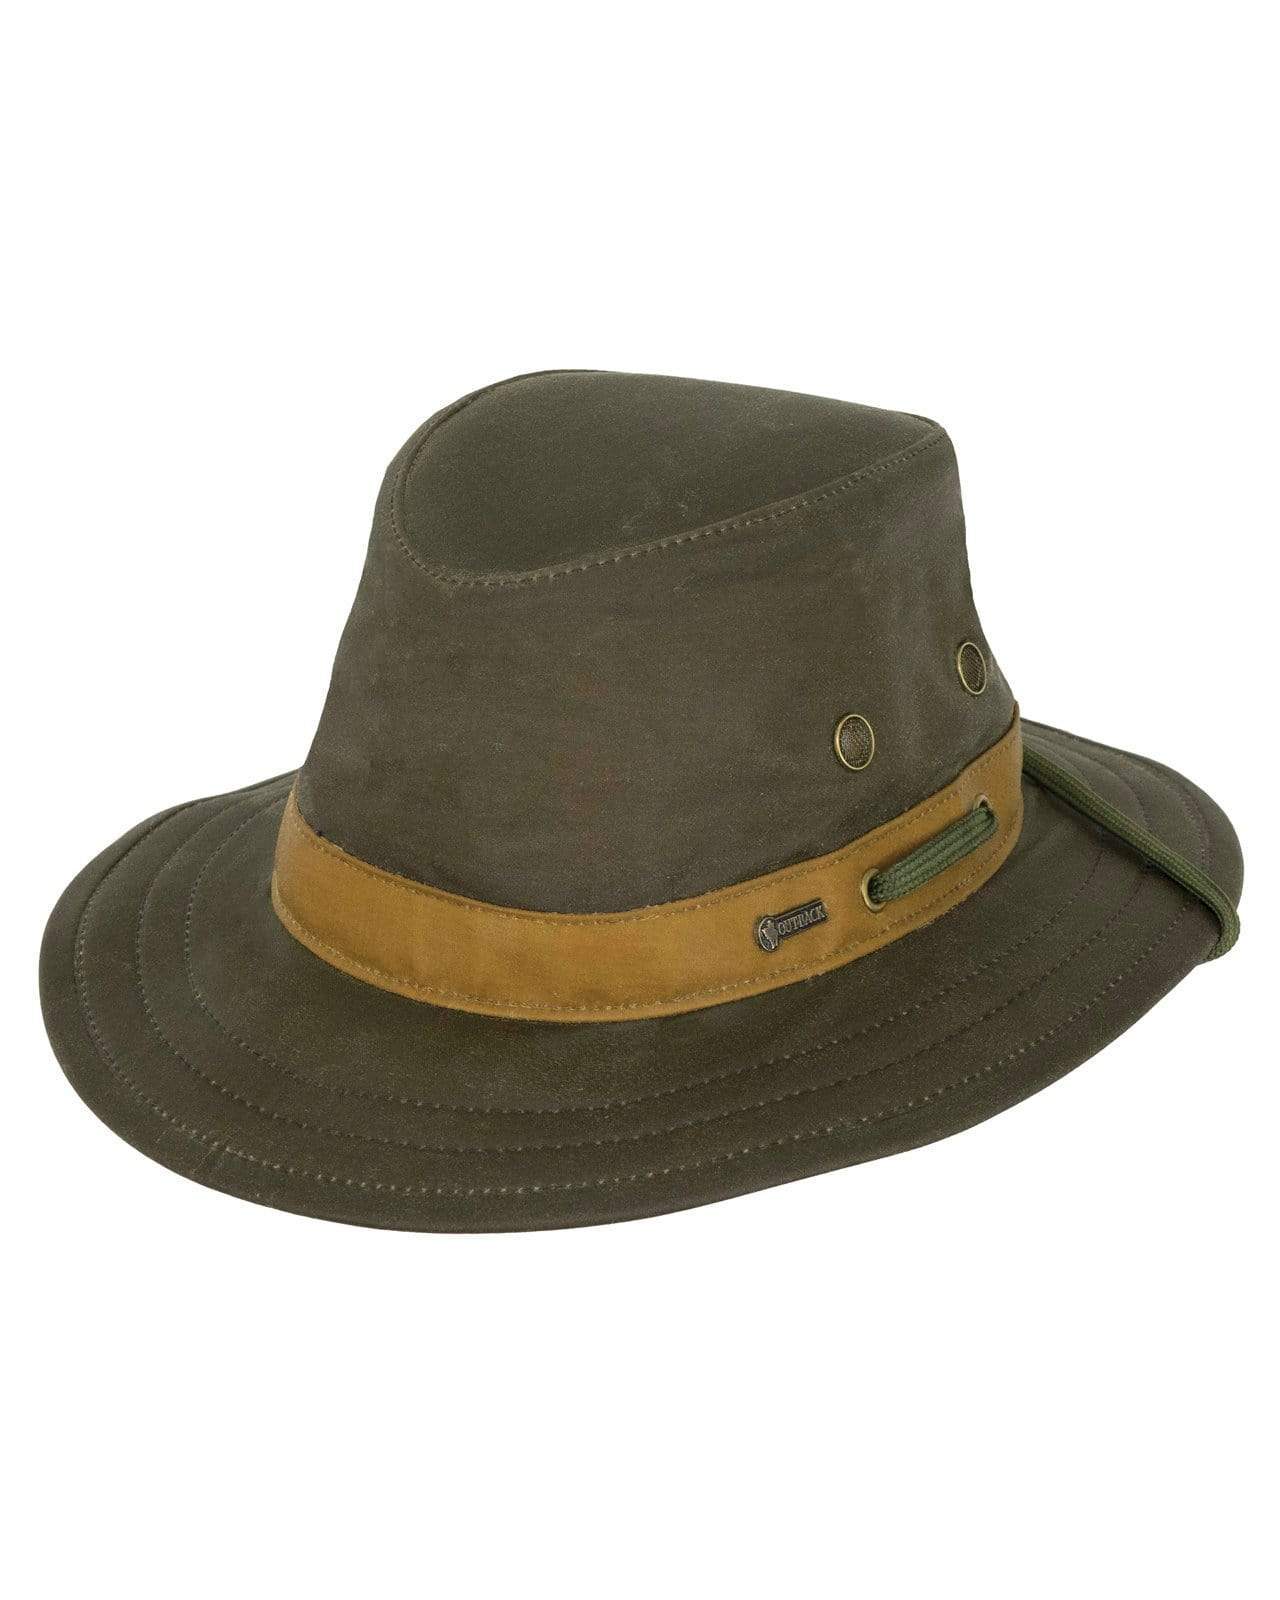 Outback Trading Company Willis Sage / S 1477-SAG-S 789043014457 Hats